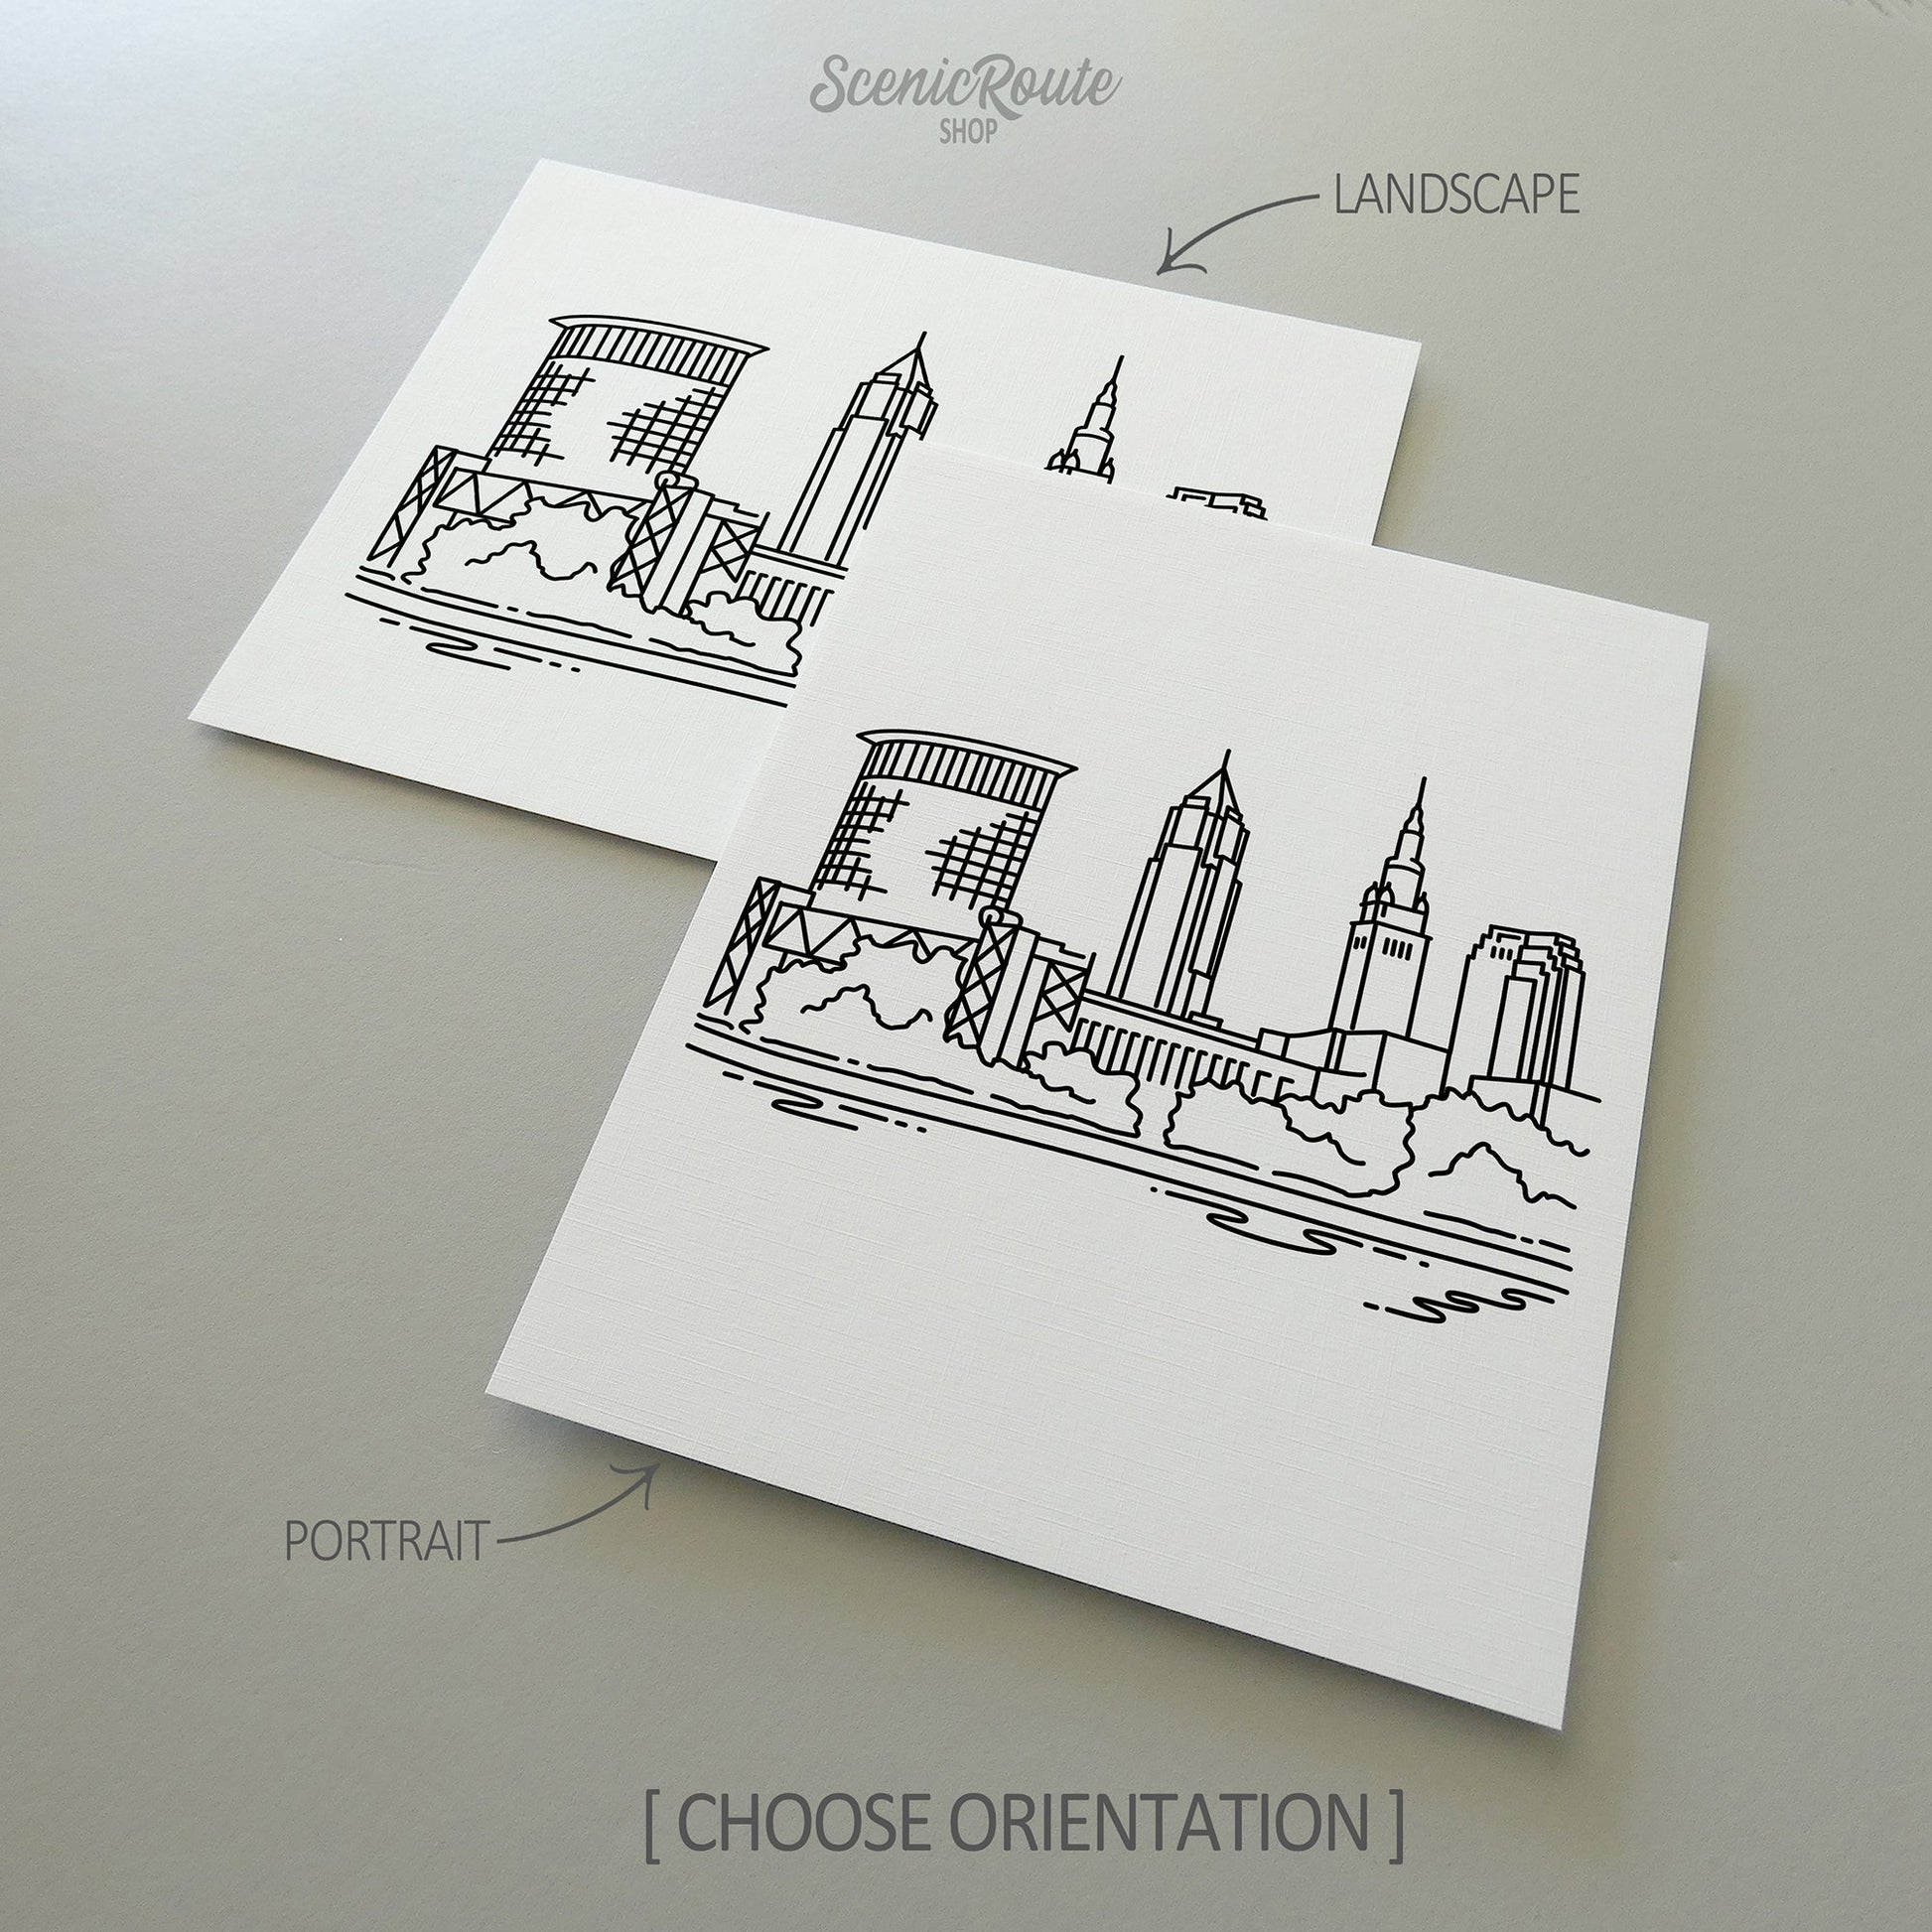 Two line art drawings of the Cleveland Skyline on white linen paper with a gray background.  The pieces are shown in portrait and landscape orientation for the available art print options.